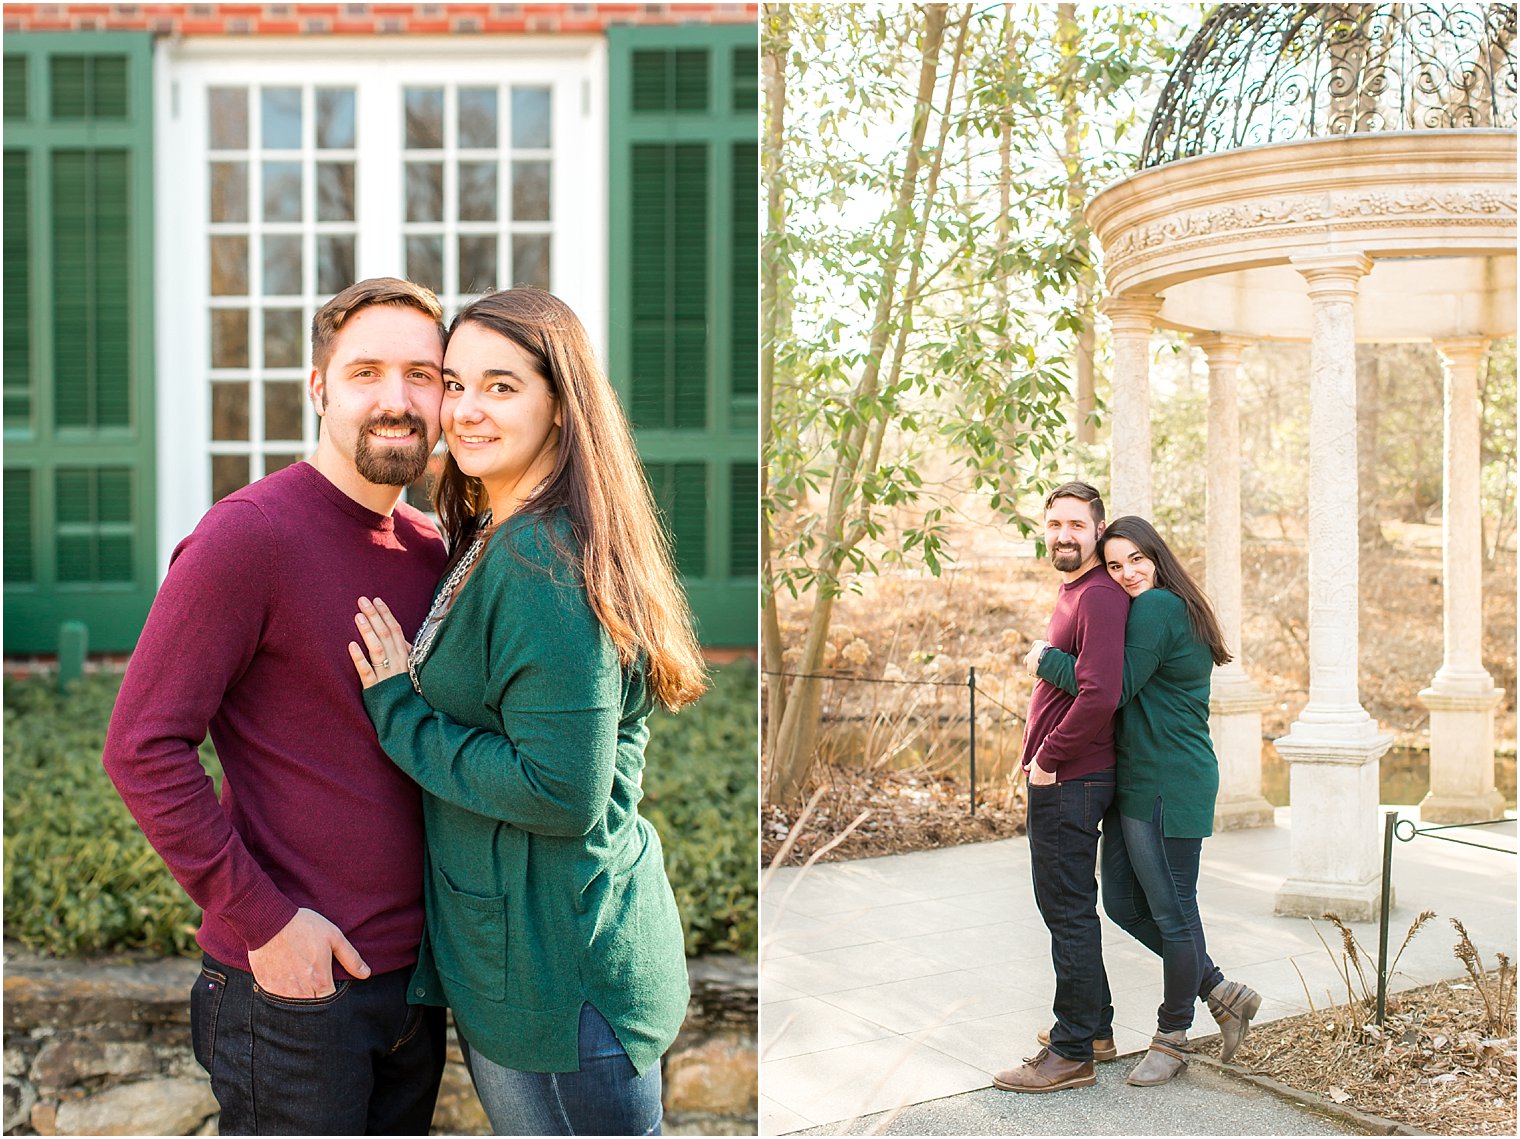 Winter engagement locations in Pennsylvania | Photo by Idalia Photography